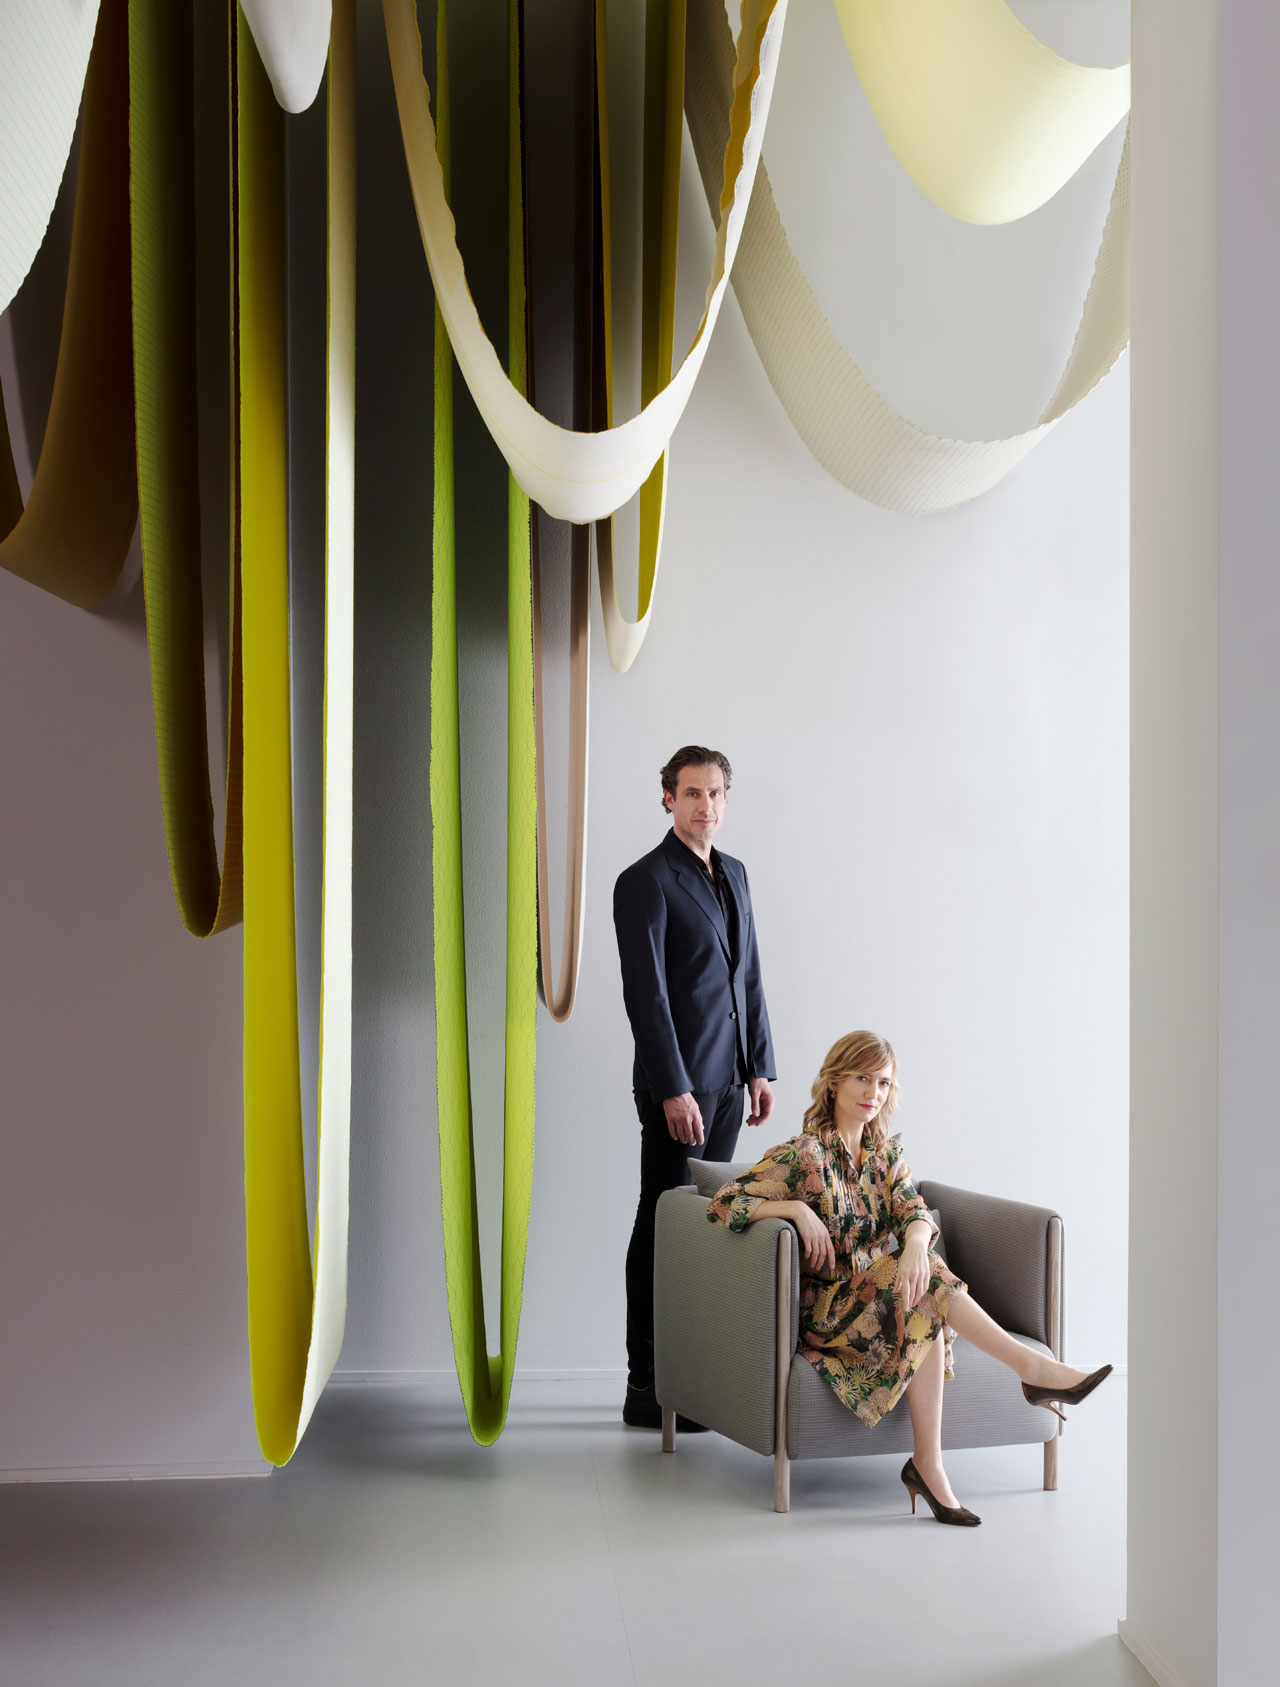 Chromatography exhibit by Stefan Scholten and Carole Baijings of Scholten &amp; Baijings in the Herman Miller featuring Mahatma textiles that were hanging from the ceiling, and beneath them elements of their new ColourForm Sofa Group for Herman Miller.Photo by Ben Anders.